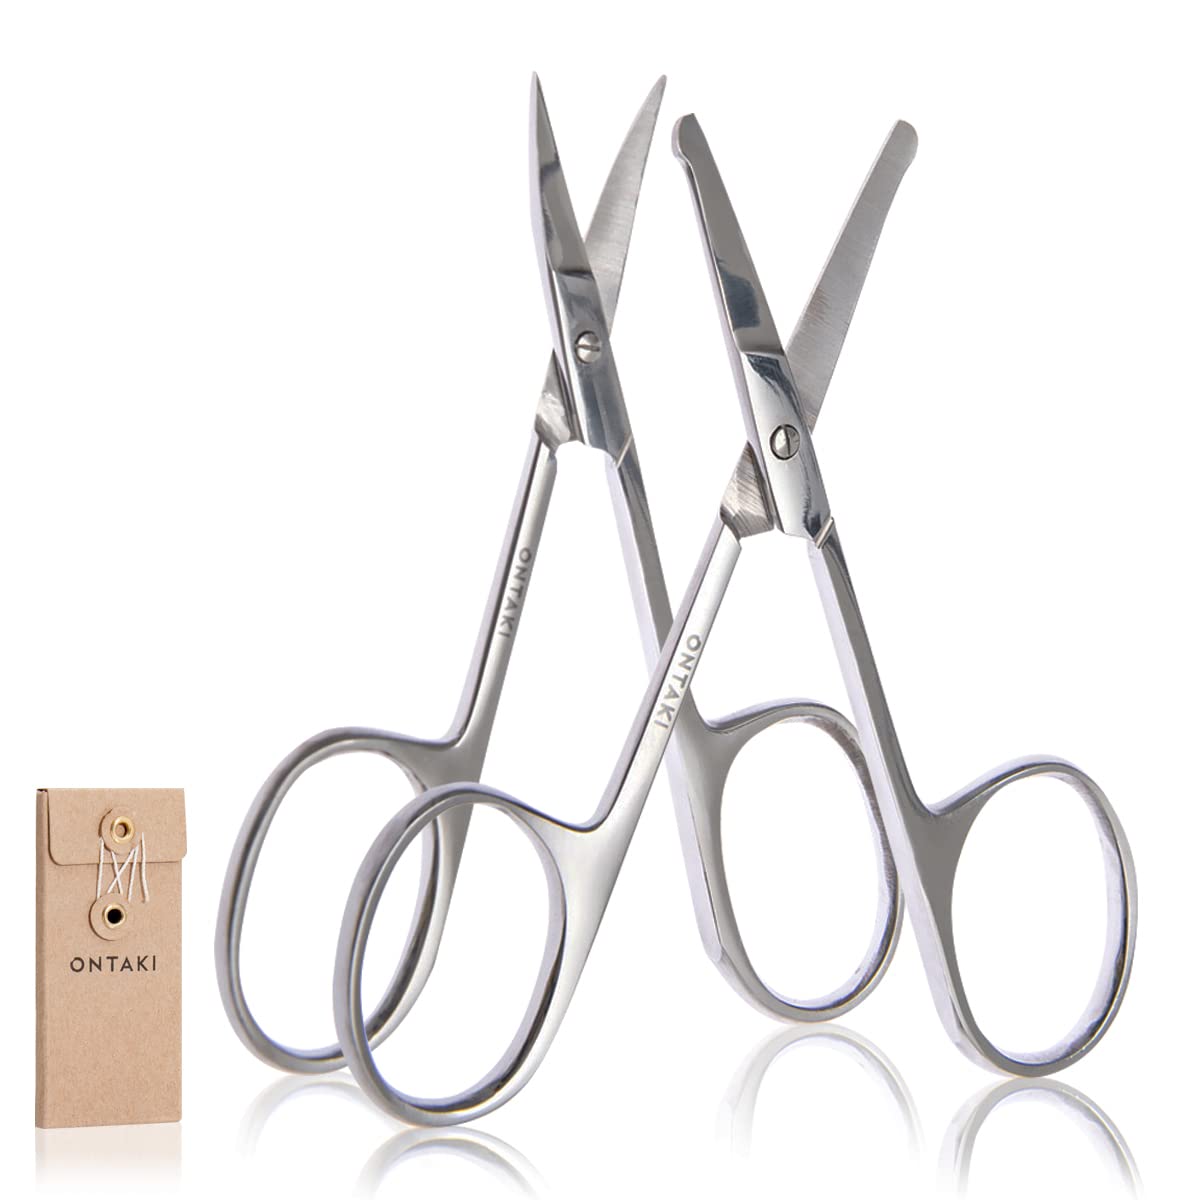 ONTAKI Curved and Rounded Facial Hair Scissors for Men - Mustache, Nose Hair & Beard Trimming Scissors, Safety Use for Eyebrows, Eyelashes, and Ear Hair - Professional Stainless Steel (Silver)